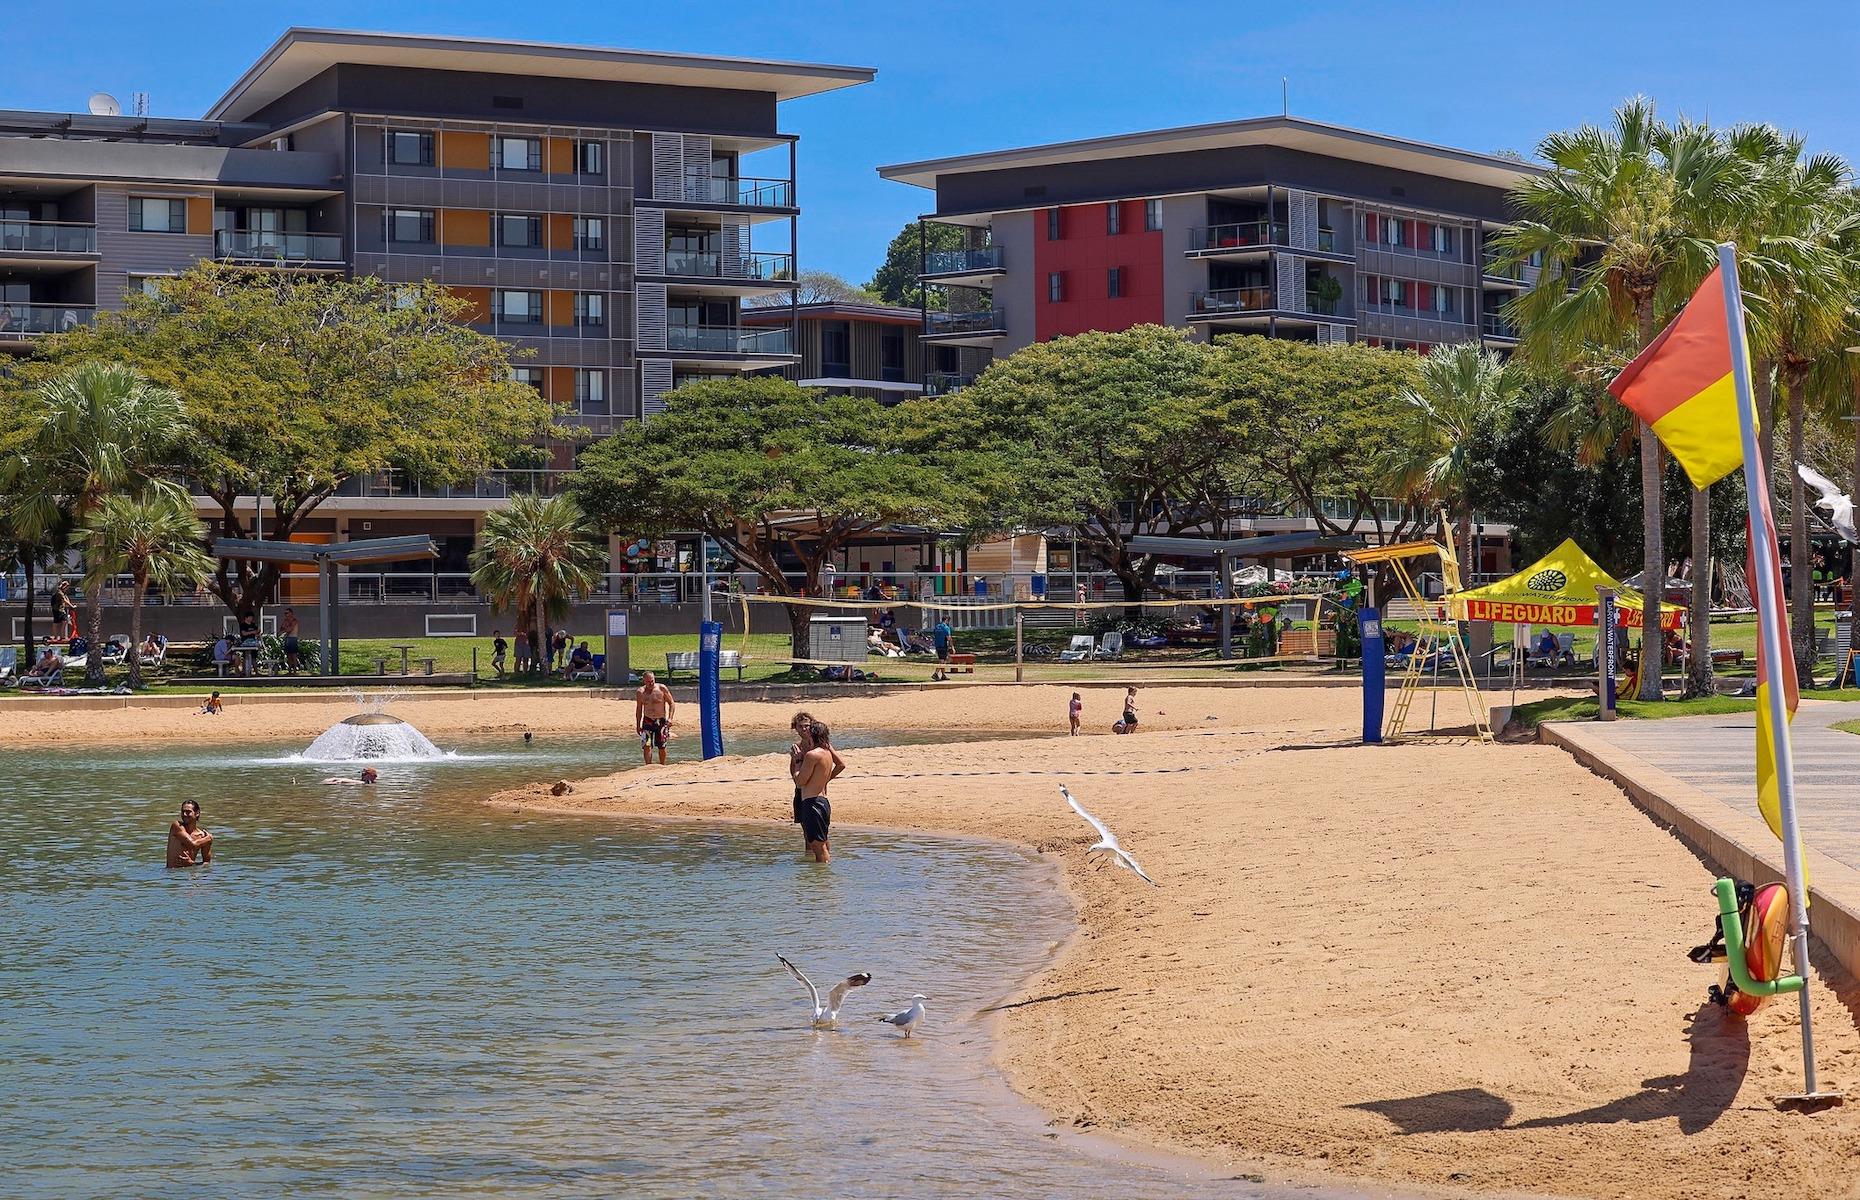 <p>There are plenty of budget-friendly ways to pass the time in this laid-back tropical city. Start with a stroll along <a href="https://www.waterfront.nt.gov.au">Darwin Waterfront</a>, where there's always something happening. It has lovely grassy areas, a promenade, public art installations and a manmade saltwater swimming lagoon and beach – you can swim here for free, though there’s a small charge for the wave lagoon. Look out for a range of free outdoor fitness and wellbeing activities, such as yoga and live music.</p>  <p><a href="https://www.loveexploring.com/galleries/157360/australias-best-beach-hotels-and-resorts?page=1"><strong>Australia's best beach hotels and resorts</strong></a></p>